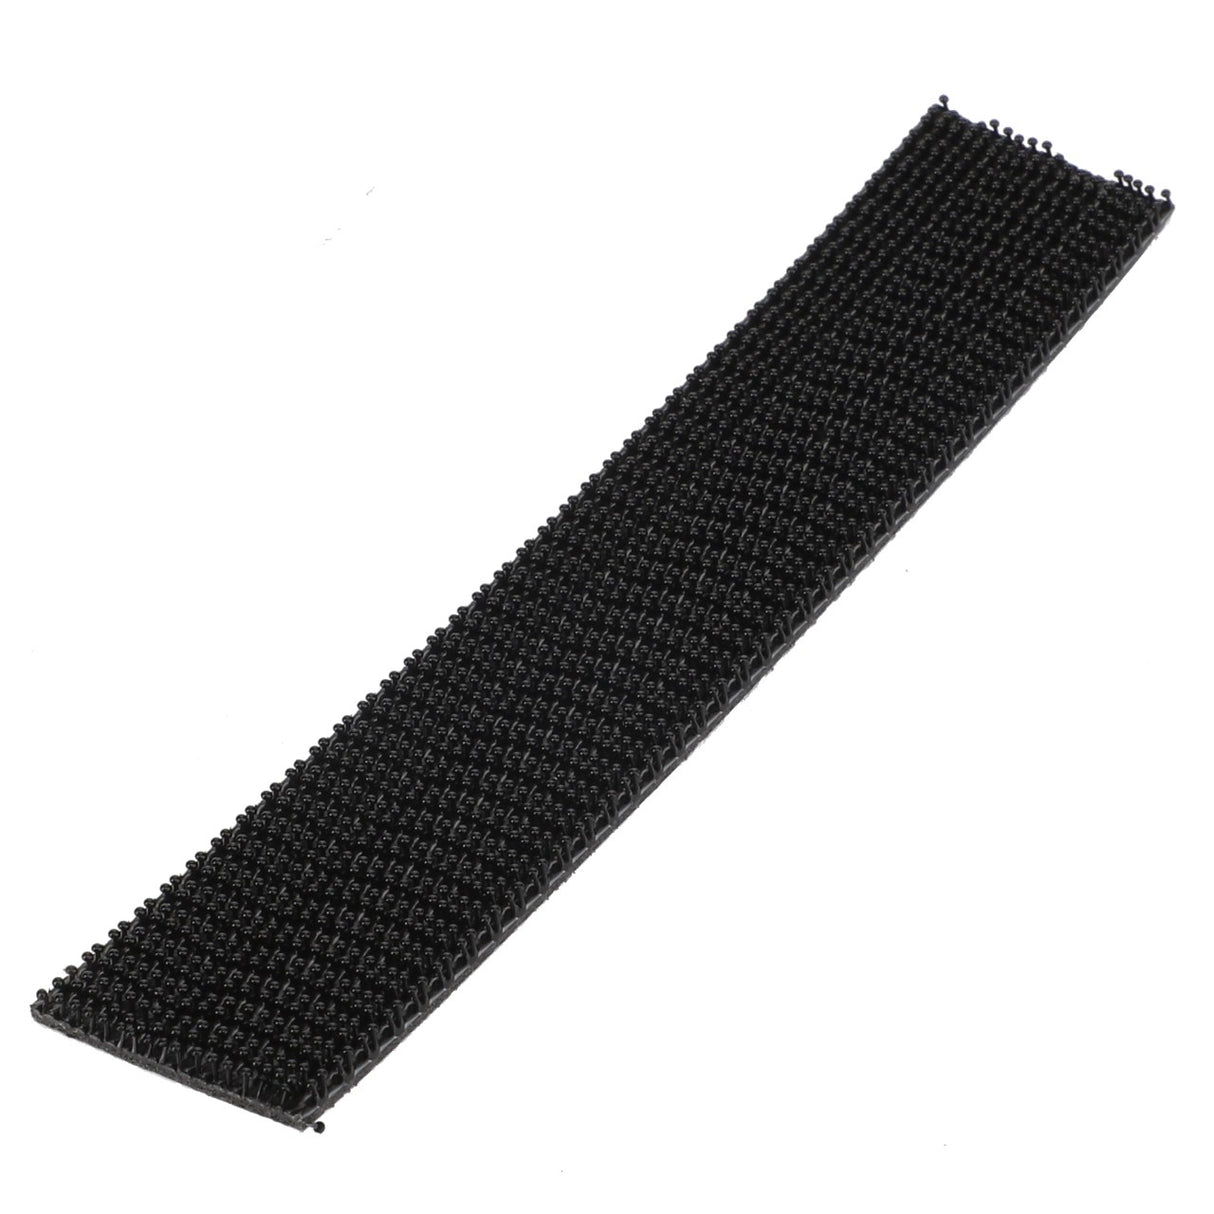 AGCO | Fastening Band - Acx2925720 - Farming Parts